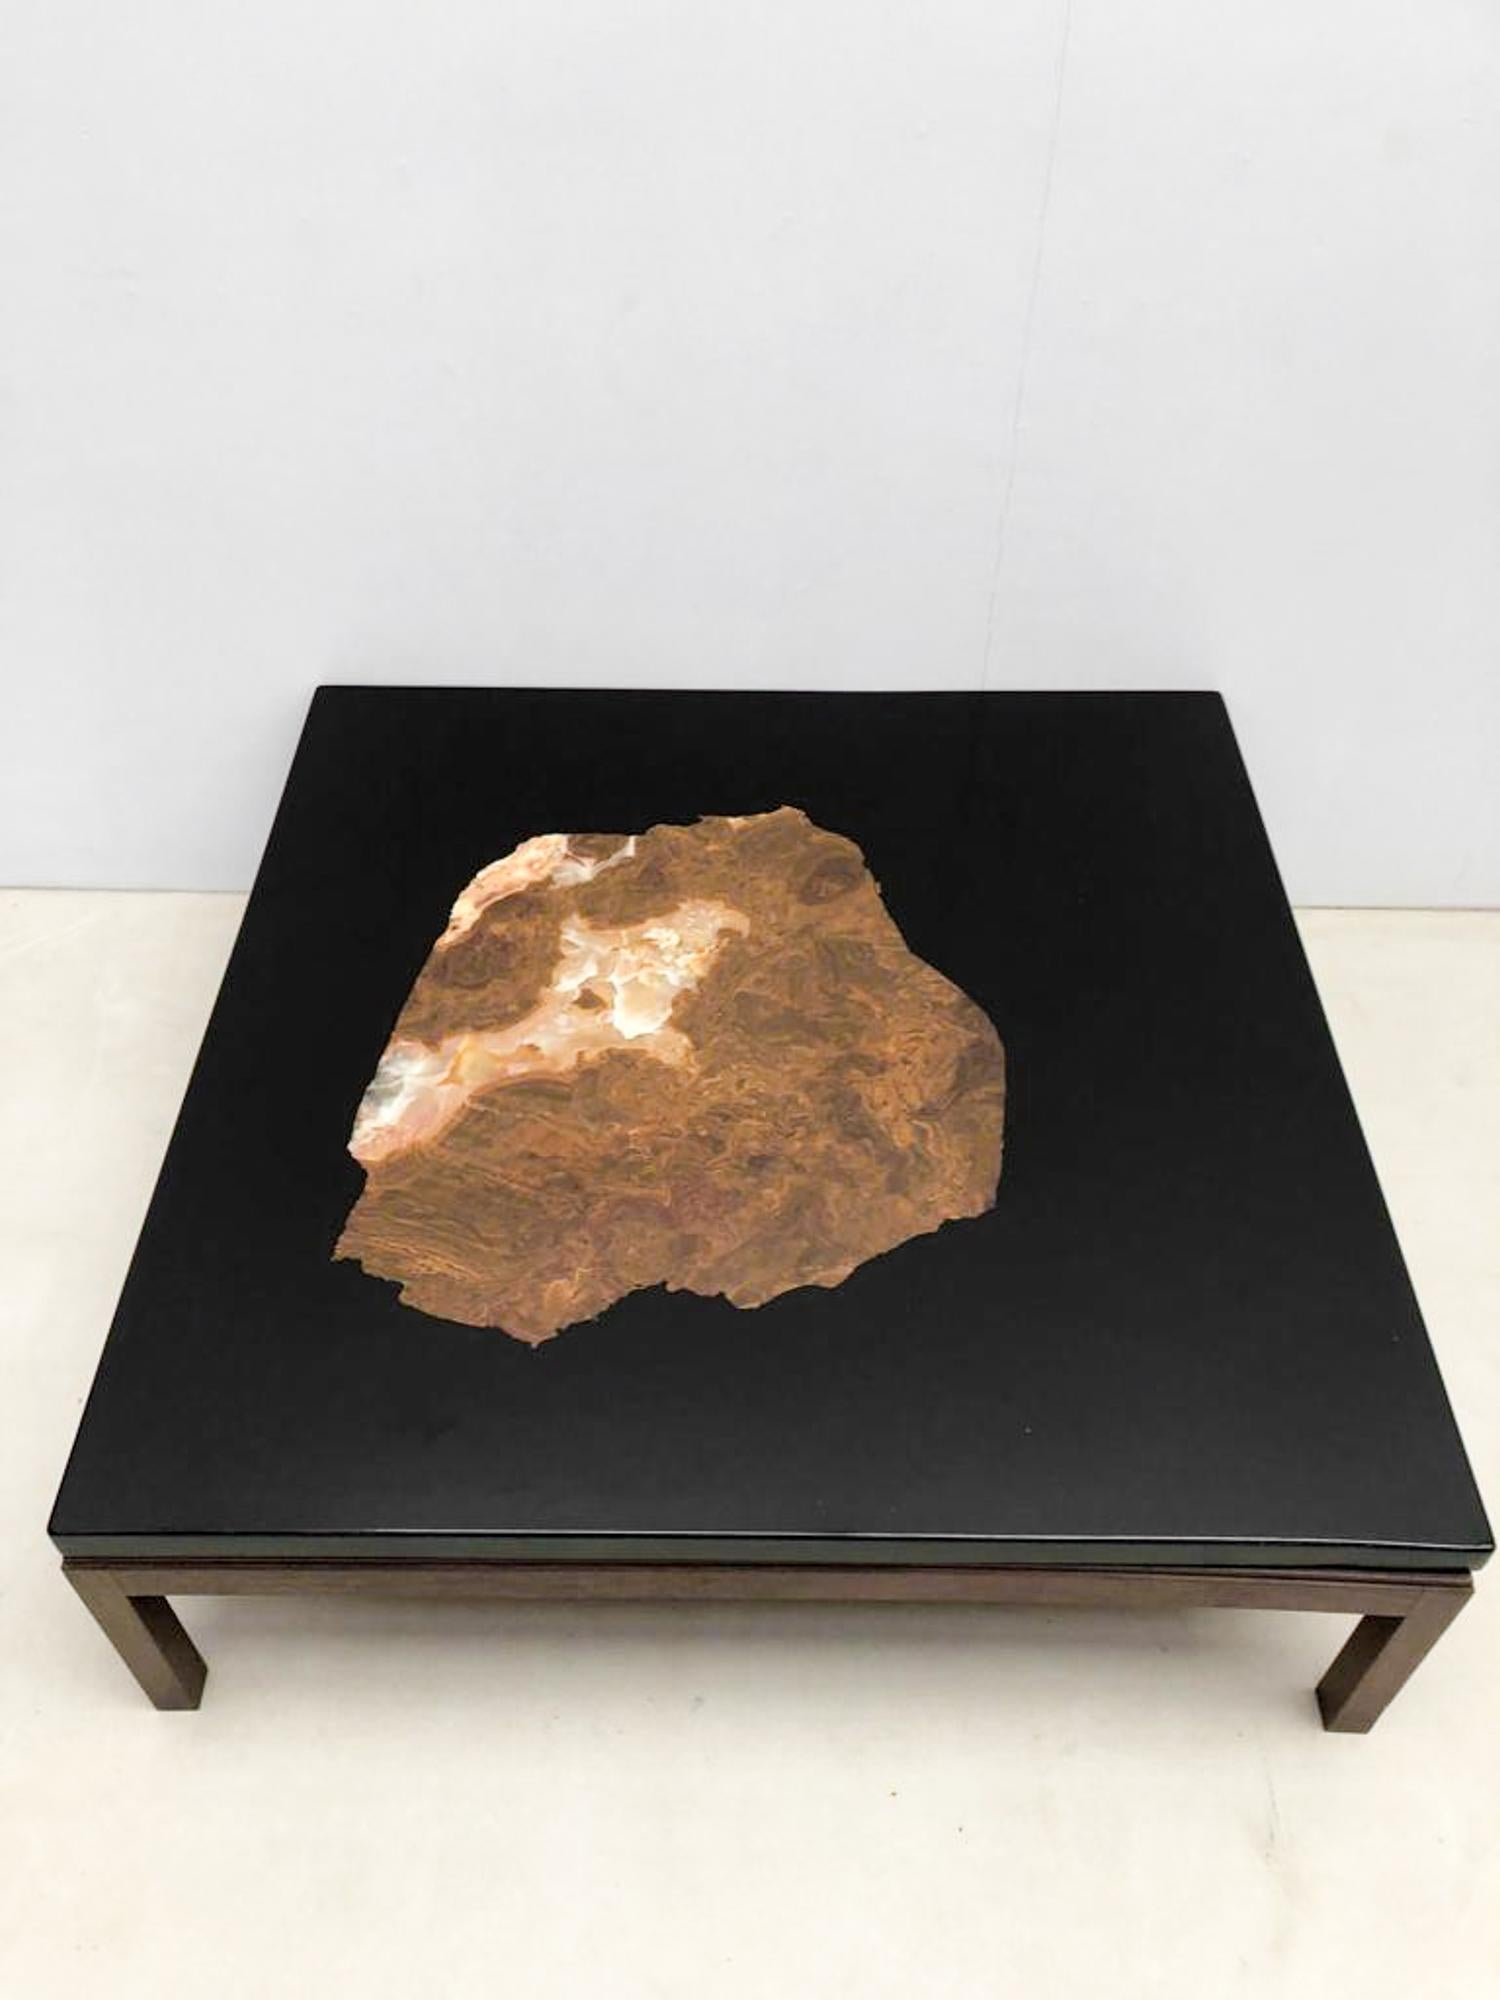 Artisan Etienne Allemeersch, who refined his craft in the workshop of the Belgian artist Ado Chale, crafted this coffee table in resin adorned with inlaid fossil stone. 

Do not hesitate to contact us for any additional information.
We would be more